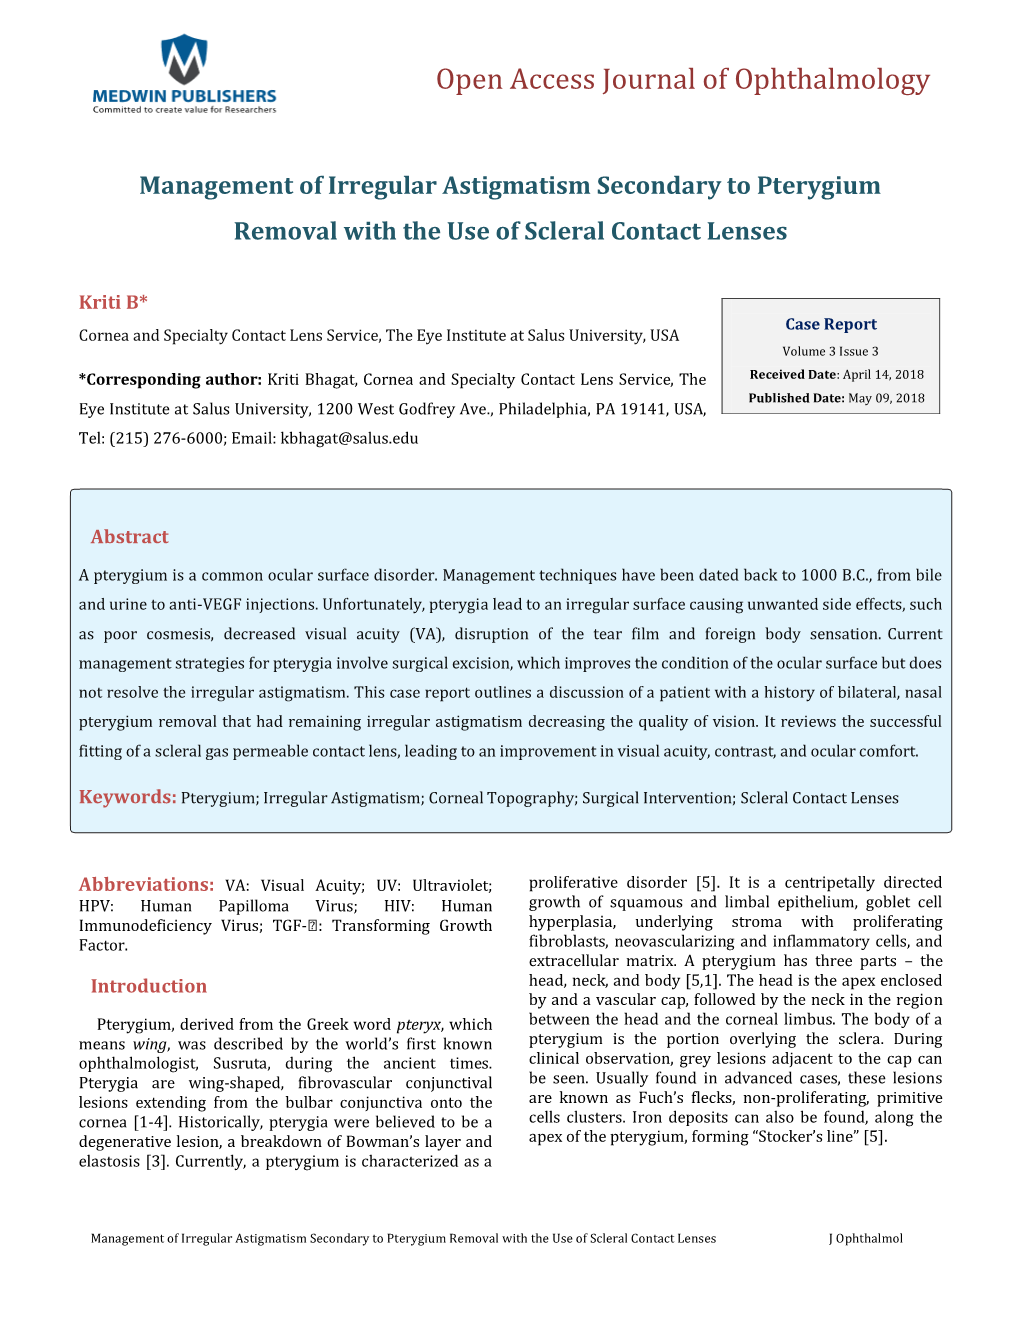 Management of Irregular Astigmatism Secondary to Pterygium Removal with the Use of Scleral Contact Lenses